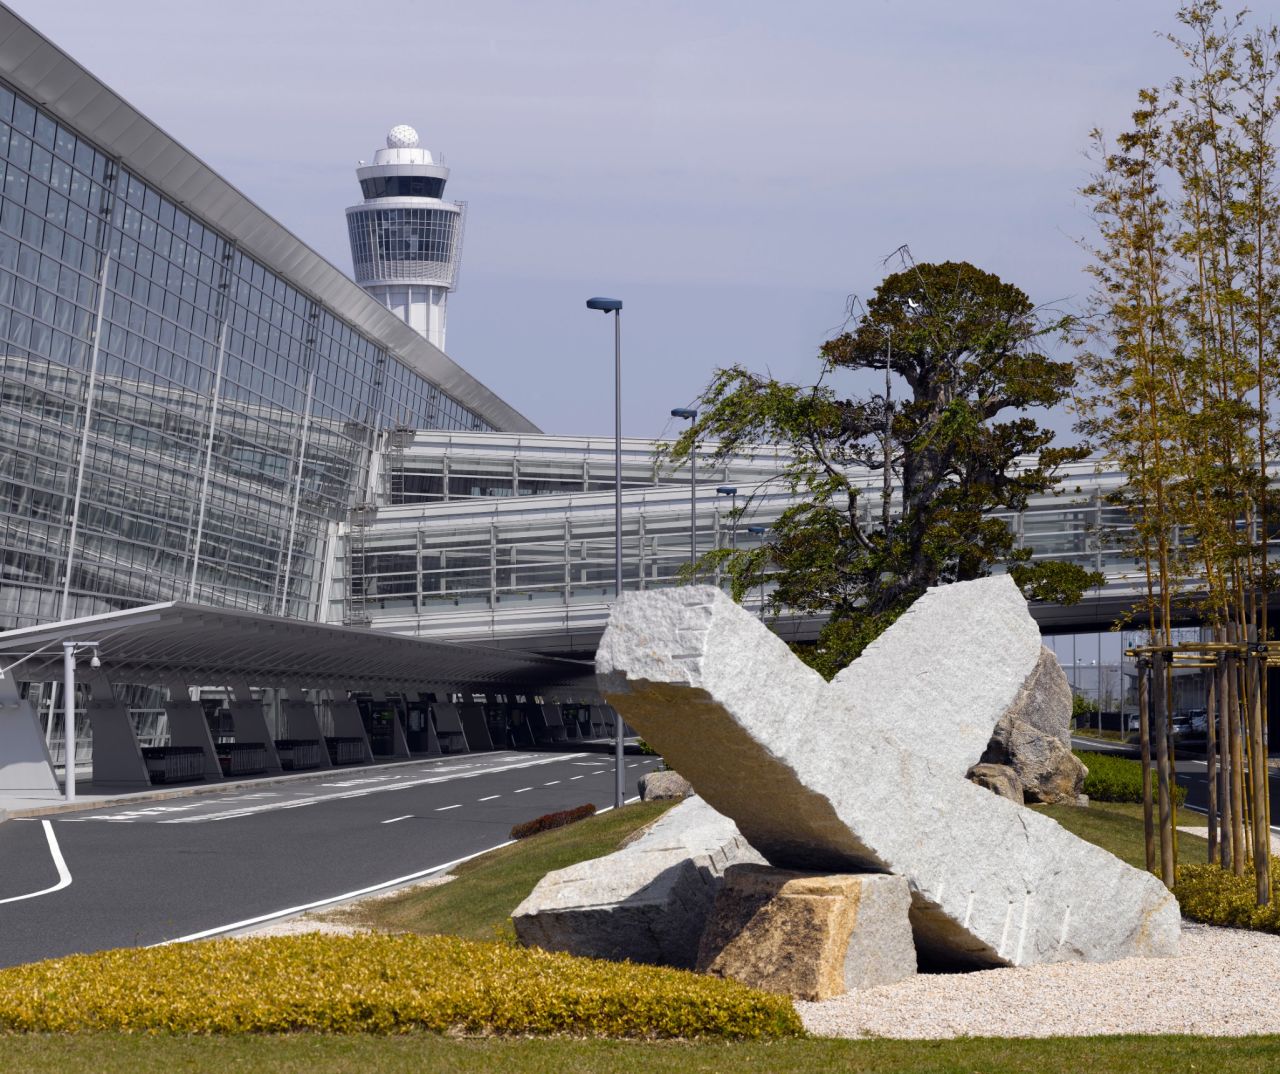 Central Japan International Airport in Nagoya is the newcomer to this top 10 list, taking seventh place in 2015.